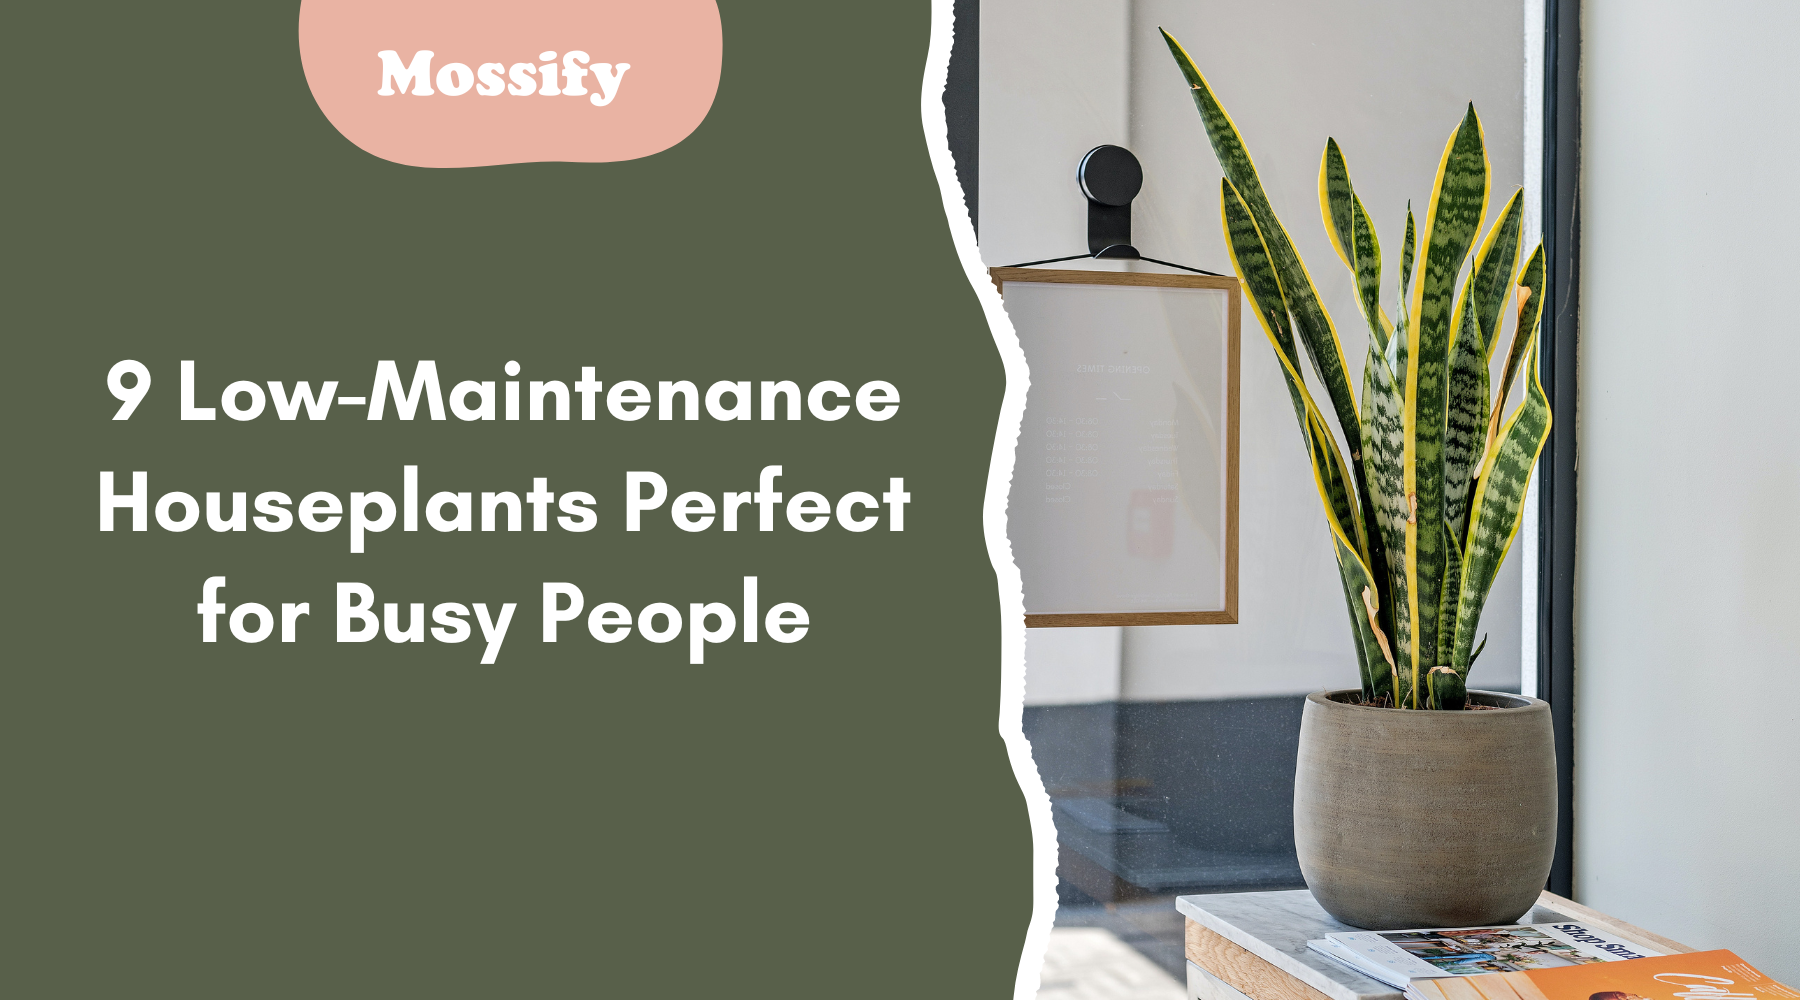 9 Low-Maintenance Houseplants Perfect for Busy People